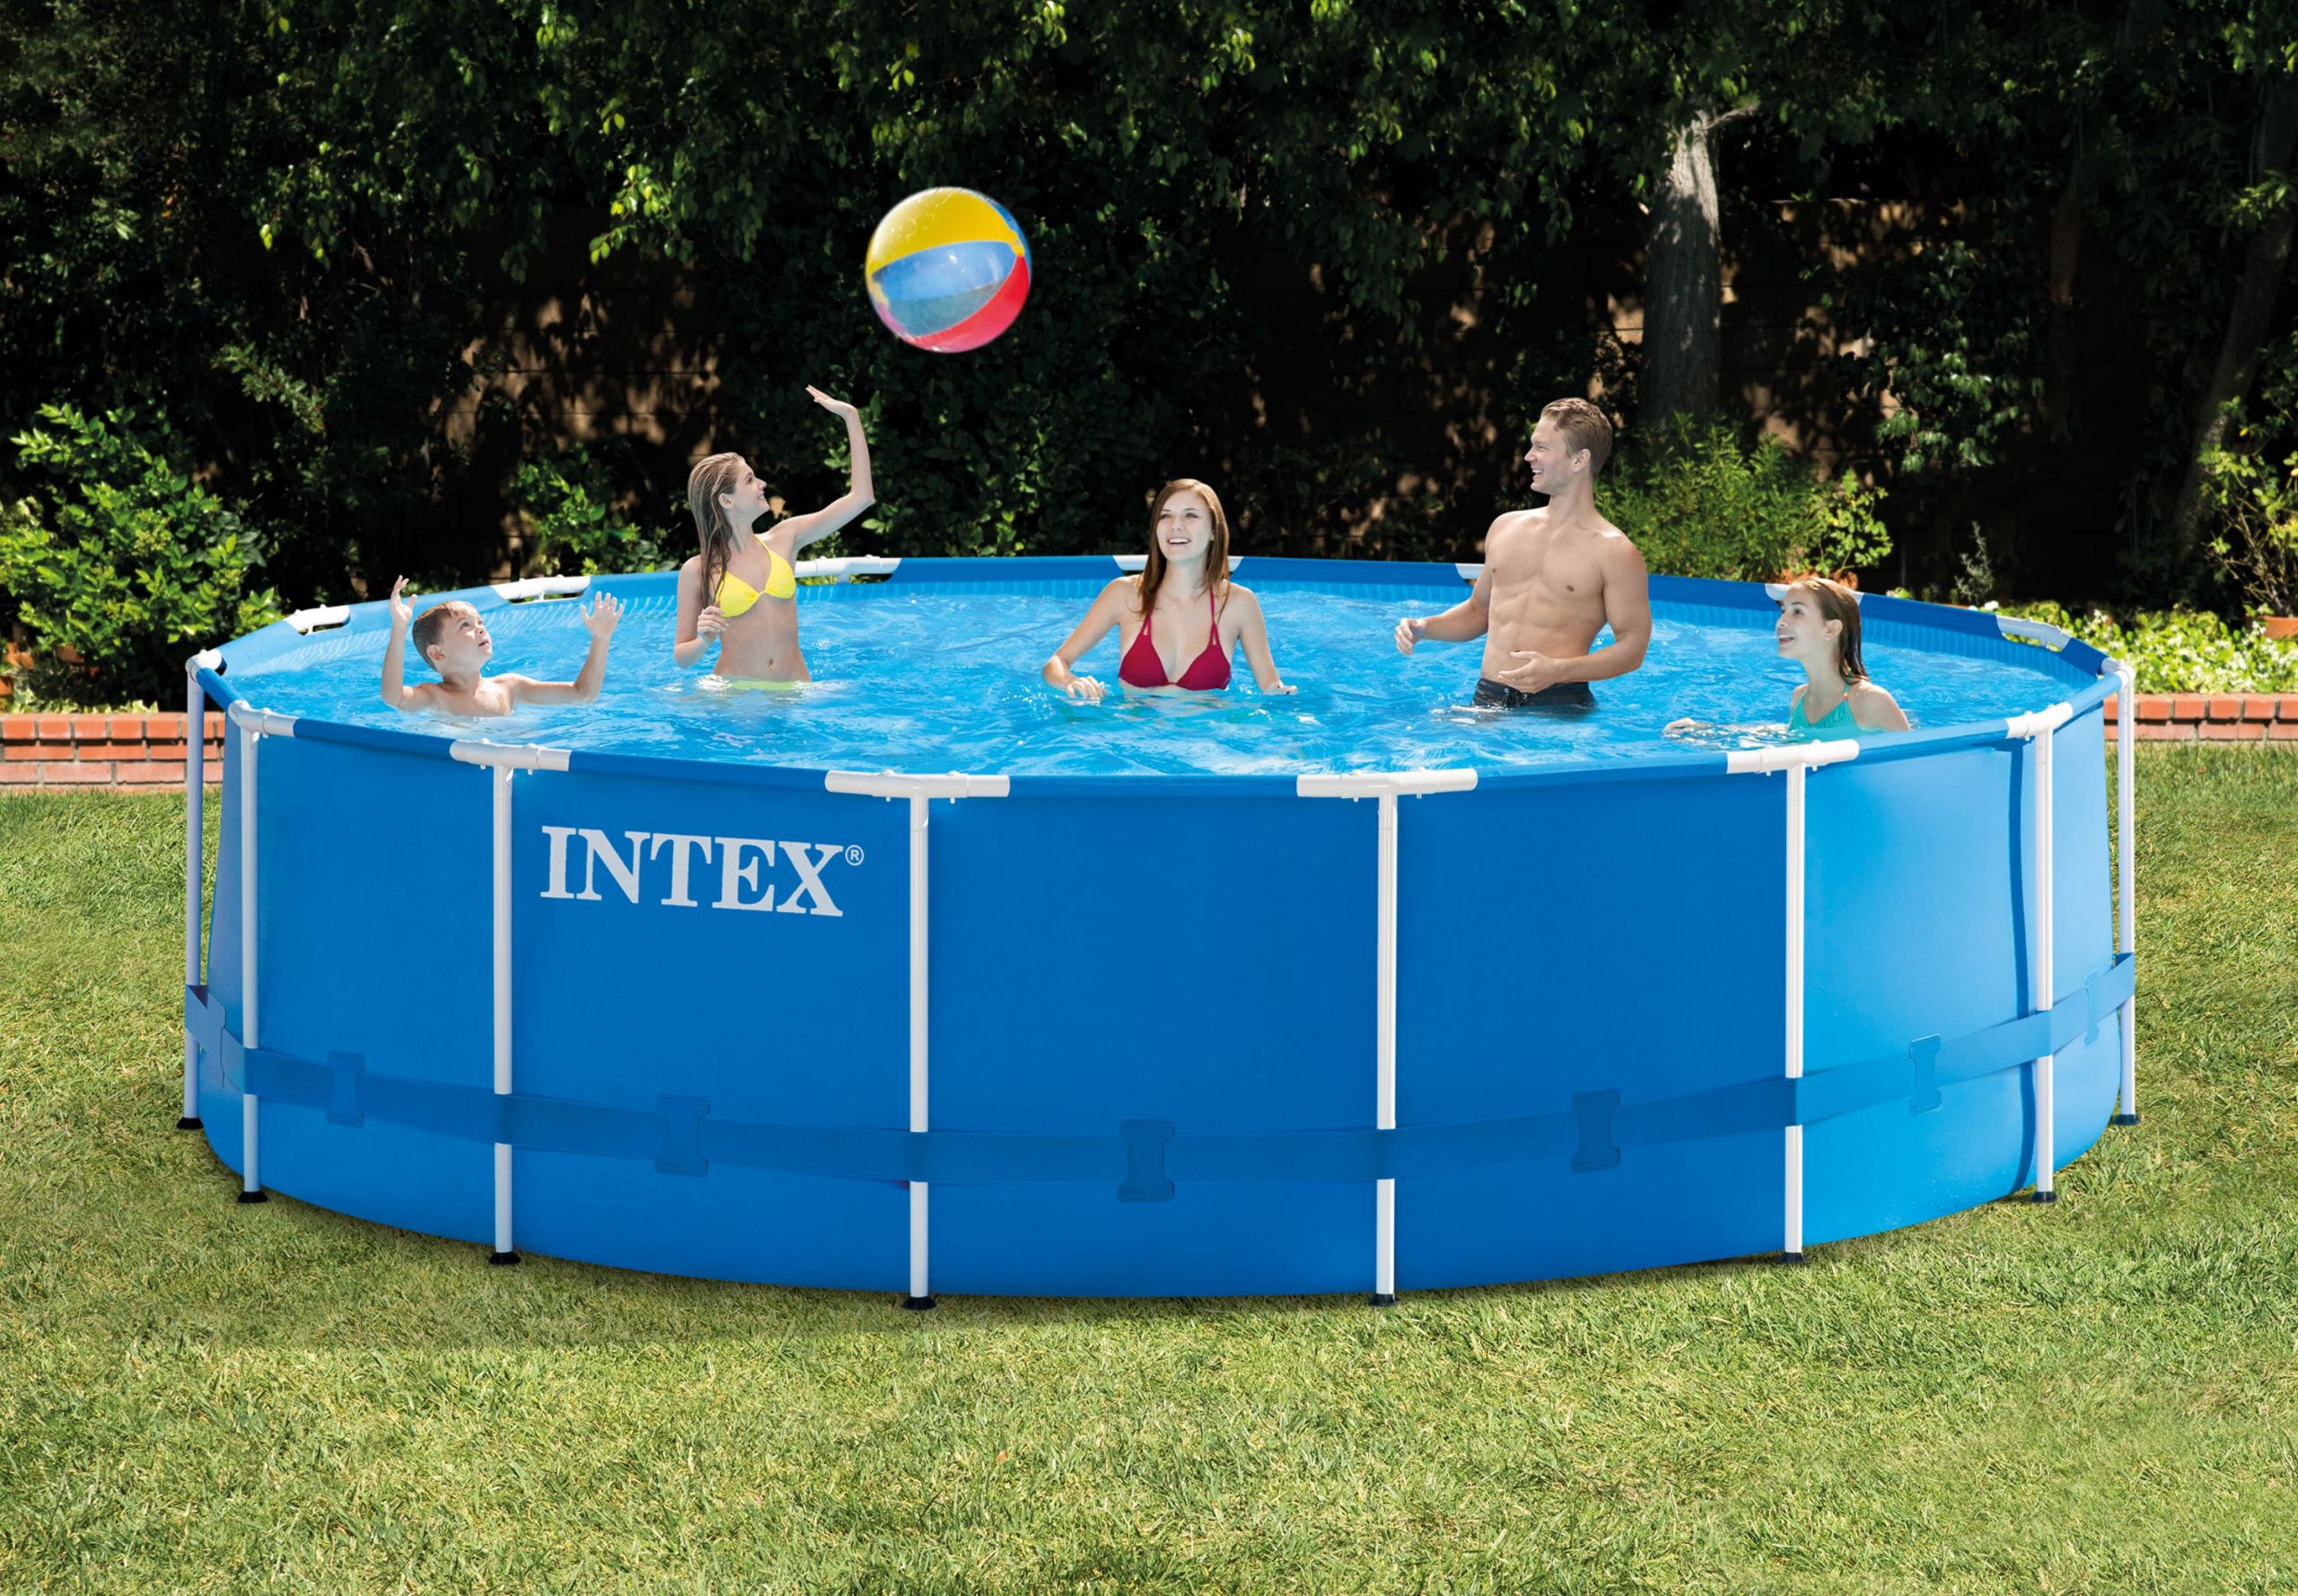 15 Above Ground Pool
 Intex 15 x 48" Metal Frame Ground Pool with Filter